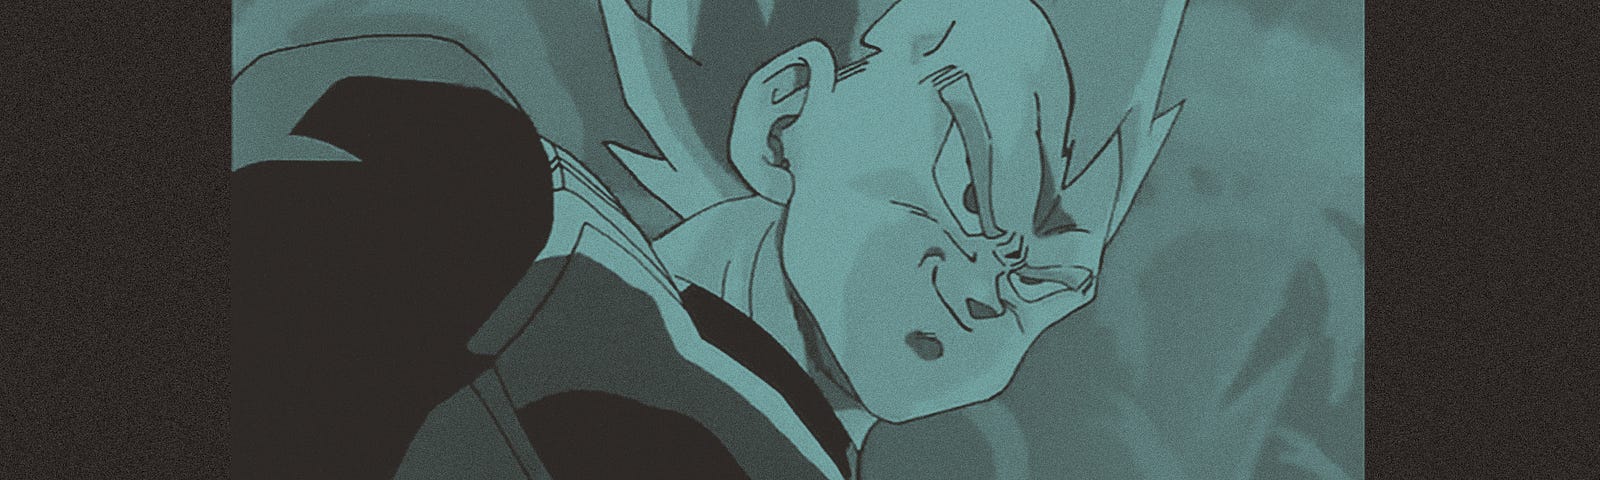 A teal edit of a closeup of Vegeta from Dragon Ball Z. He is in Super Saiyan mode and is smirking.